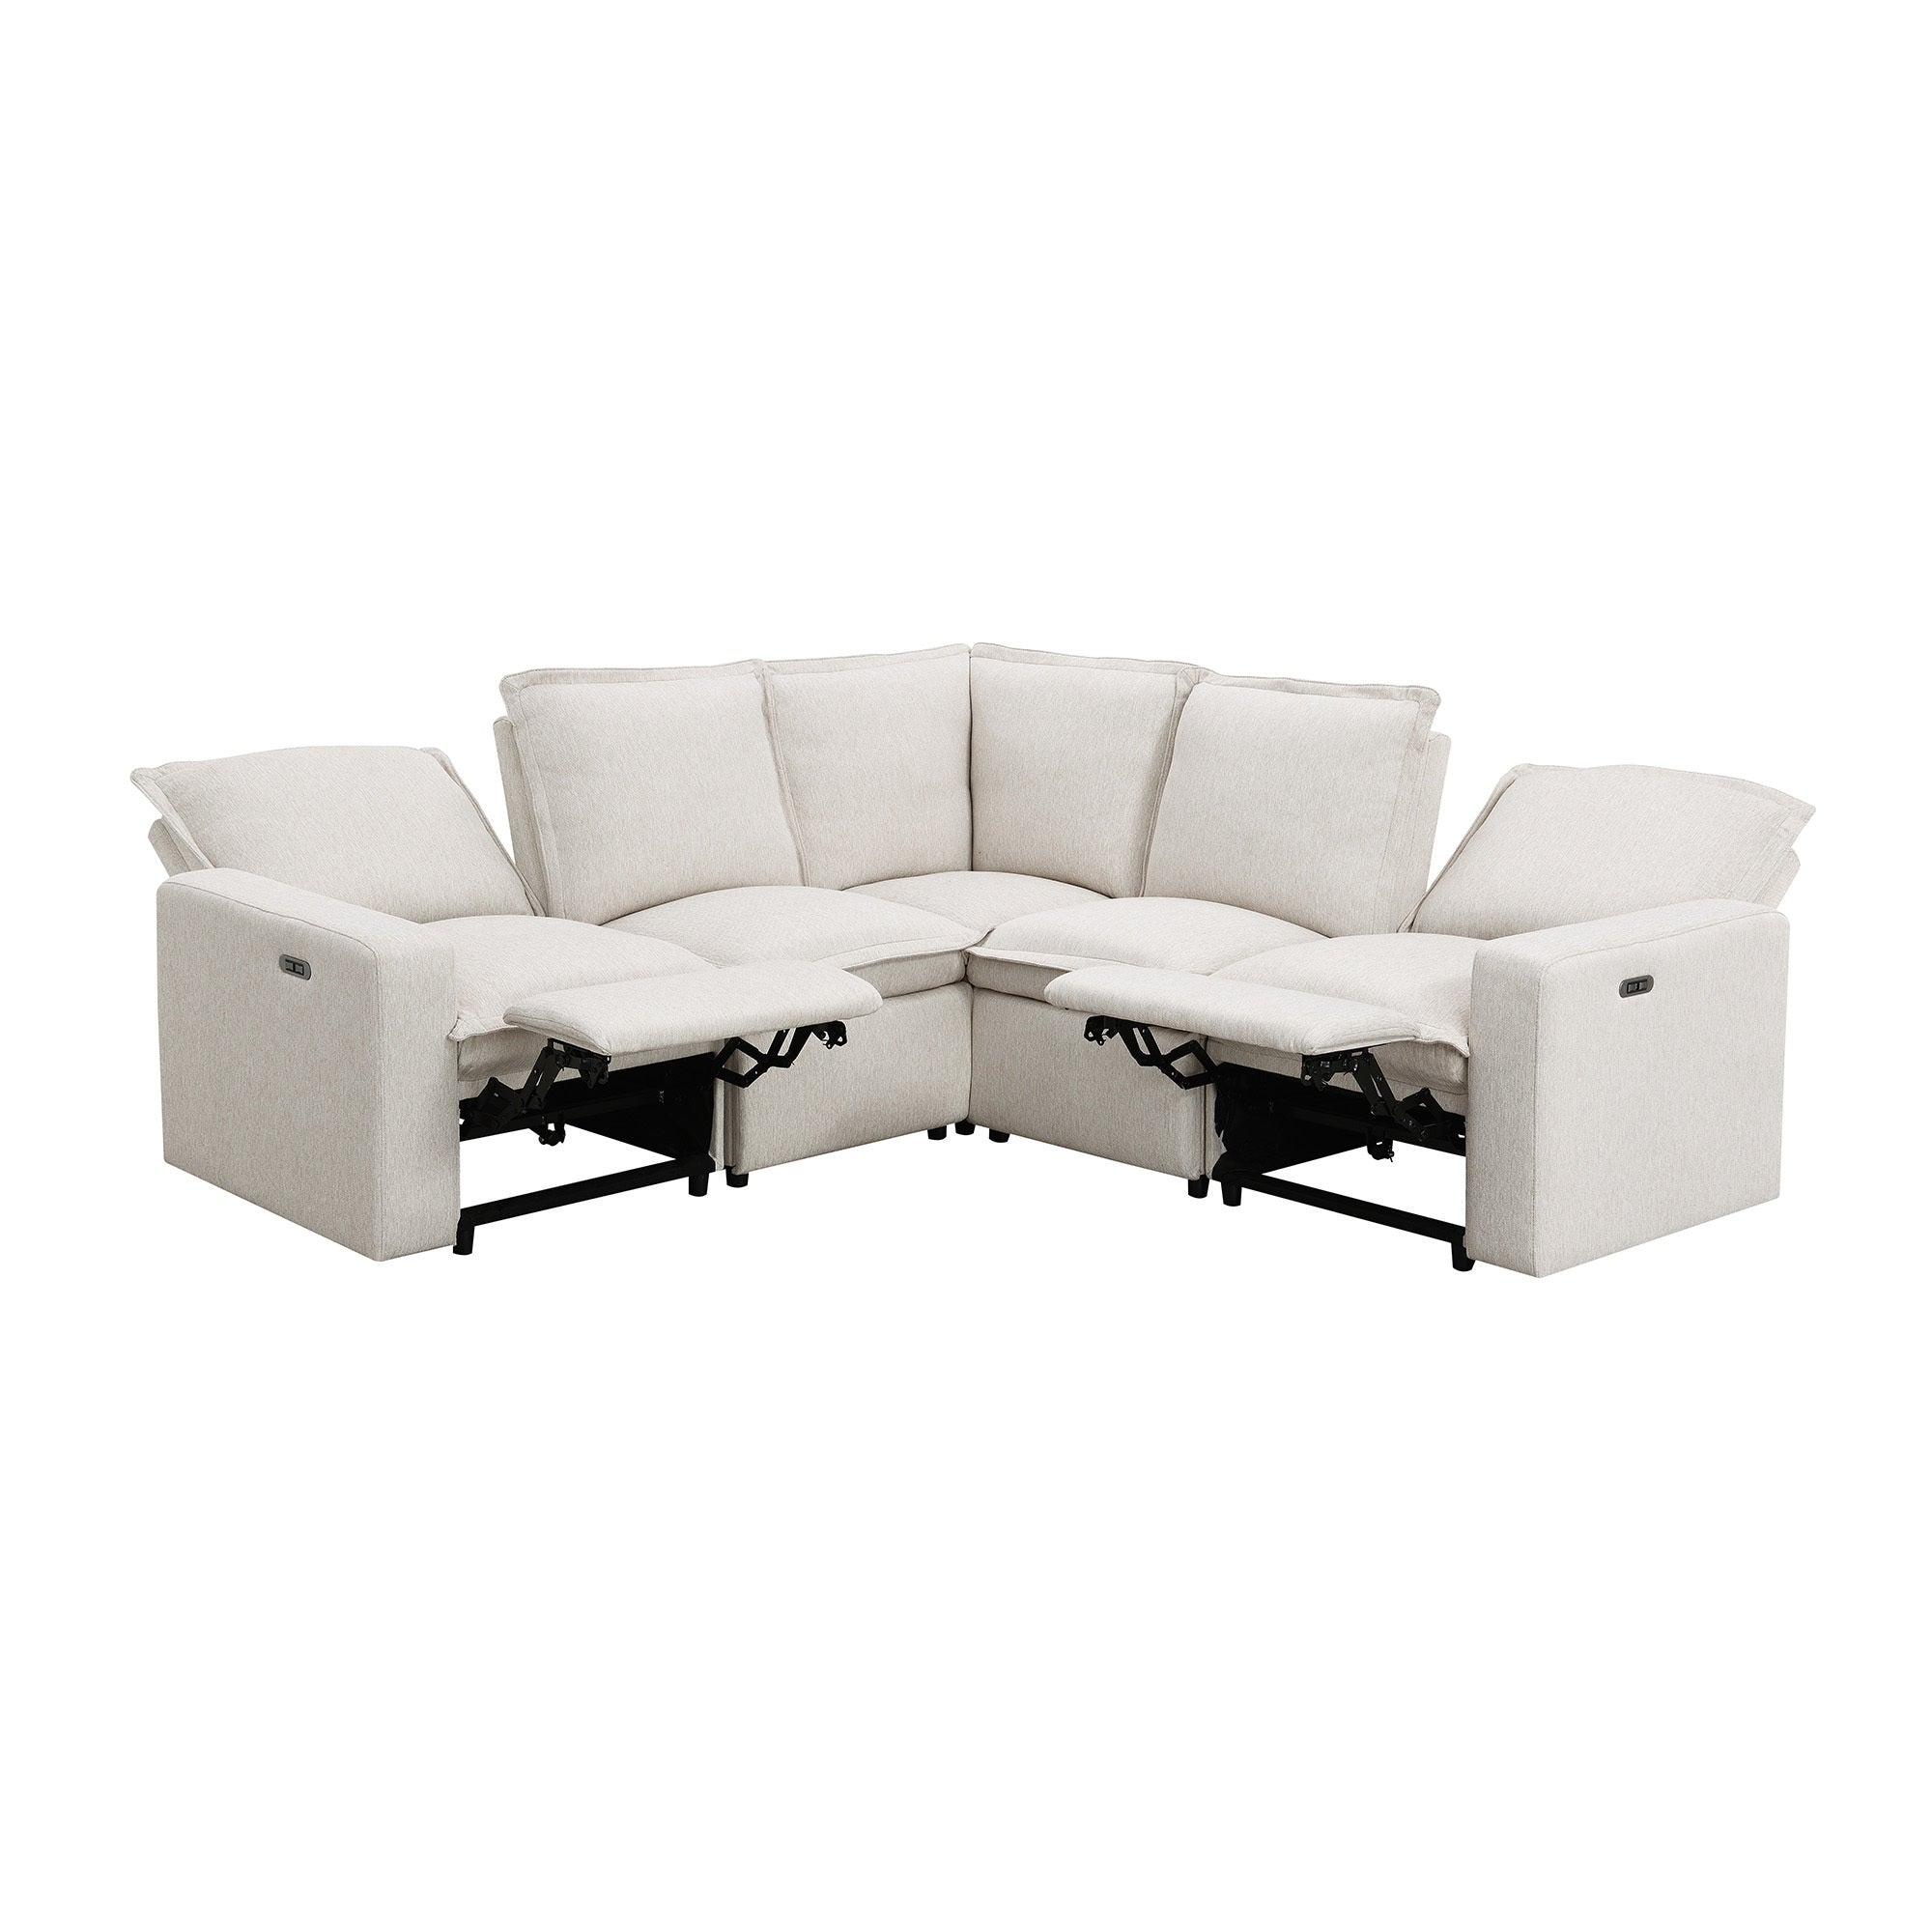 Beige Power Recliner Sectional - USB, Soft, Home Theater